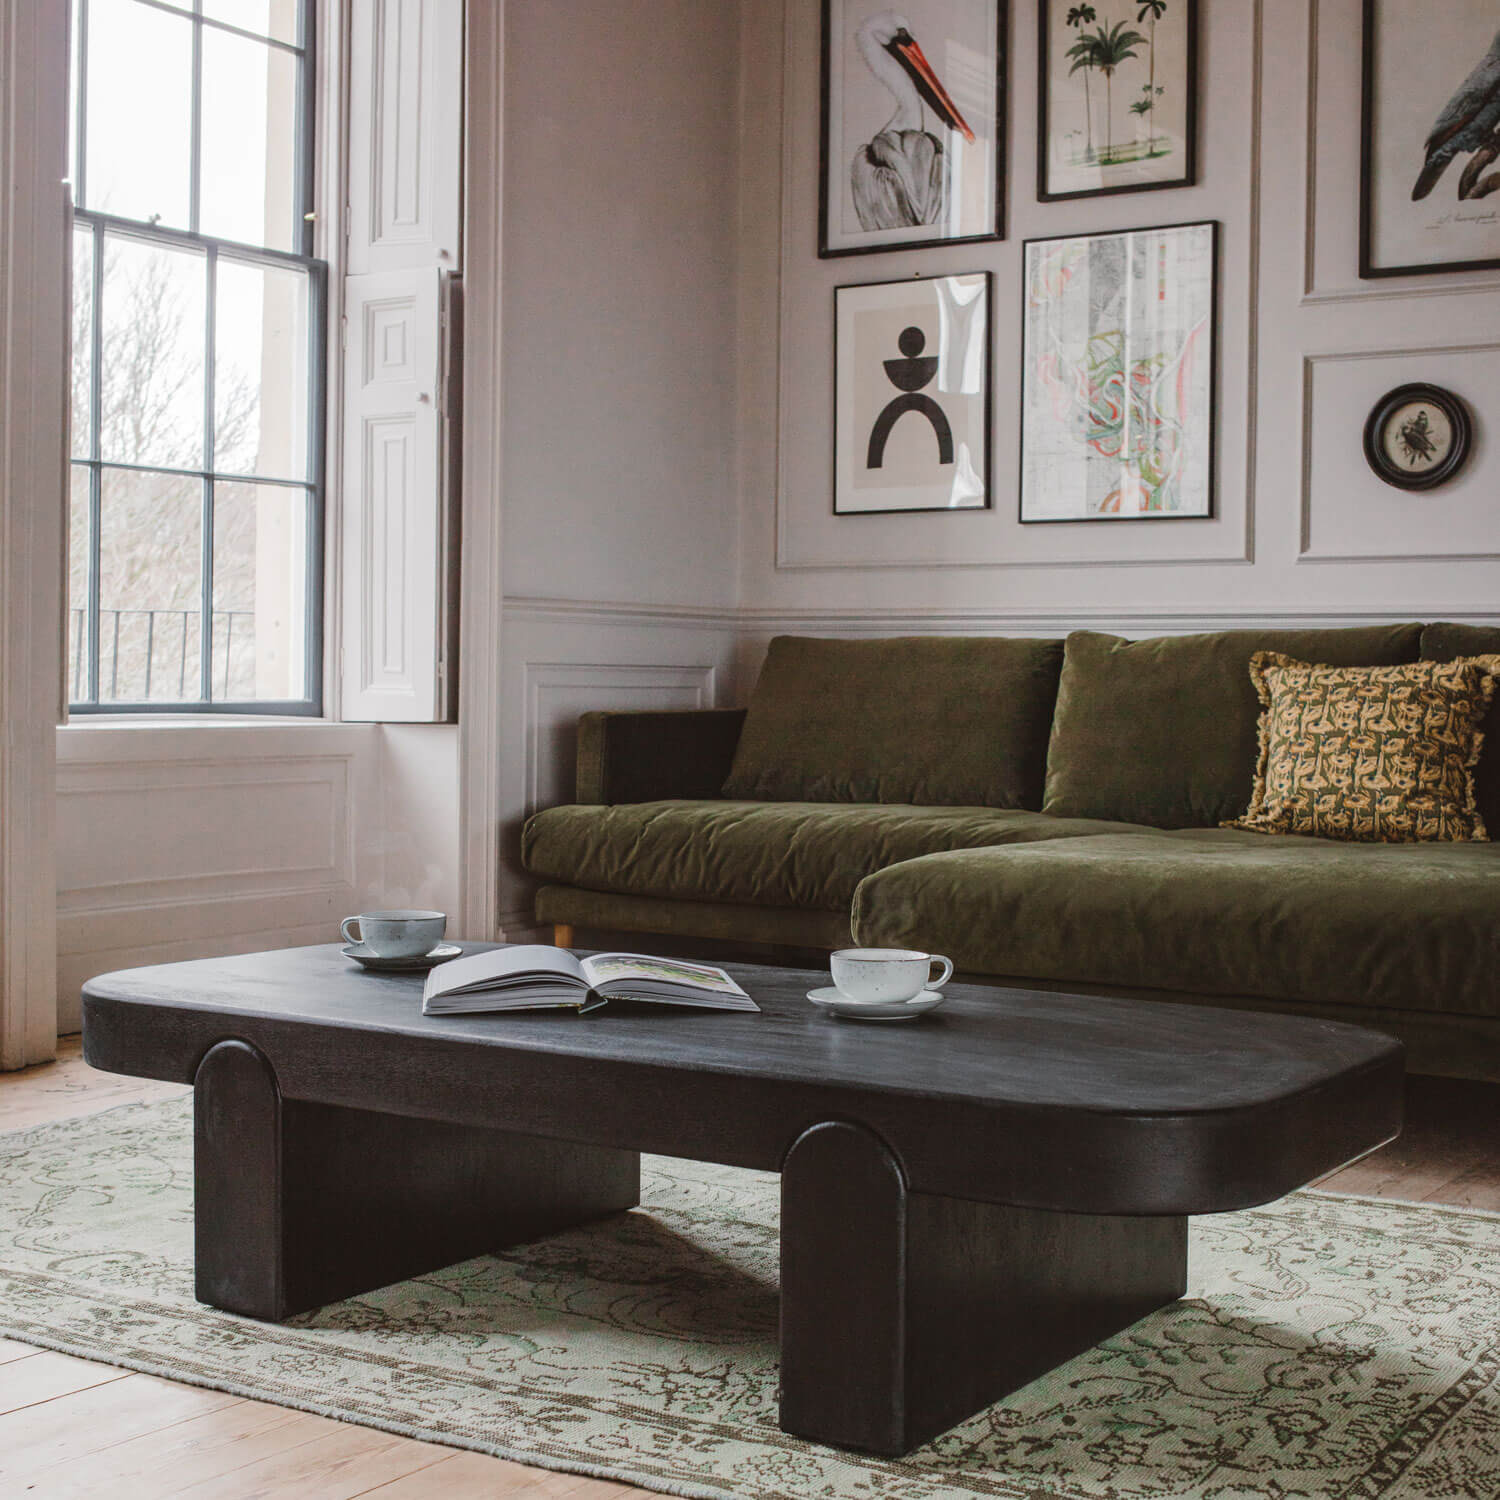 Graham and Green Delano Coffee Table - image 1